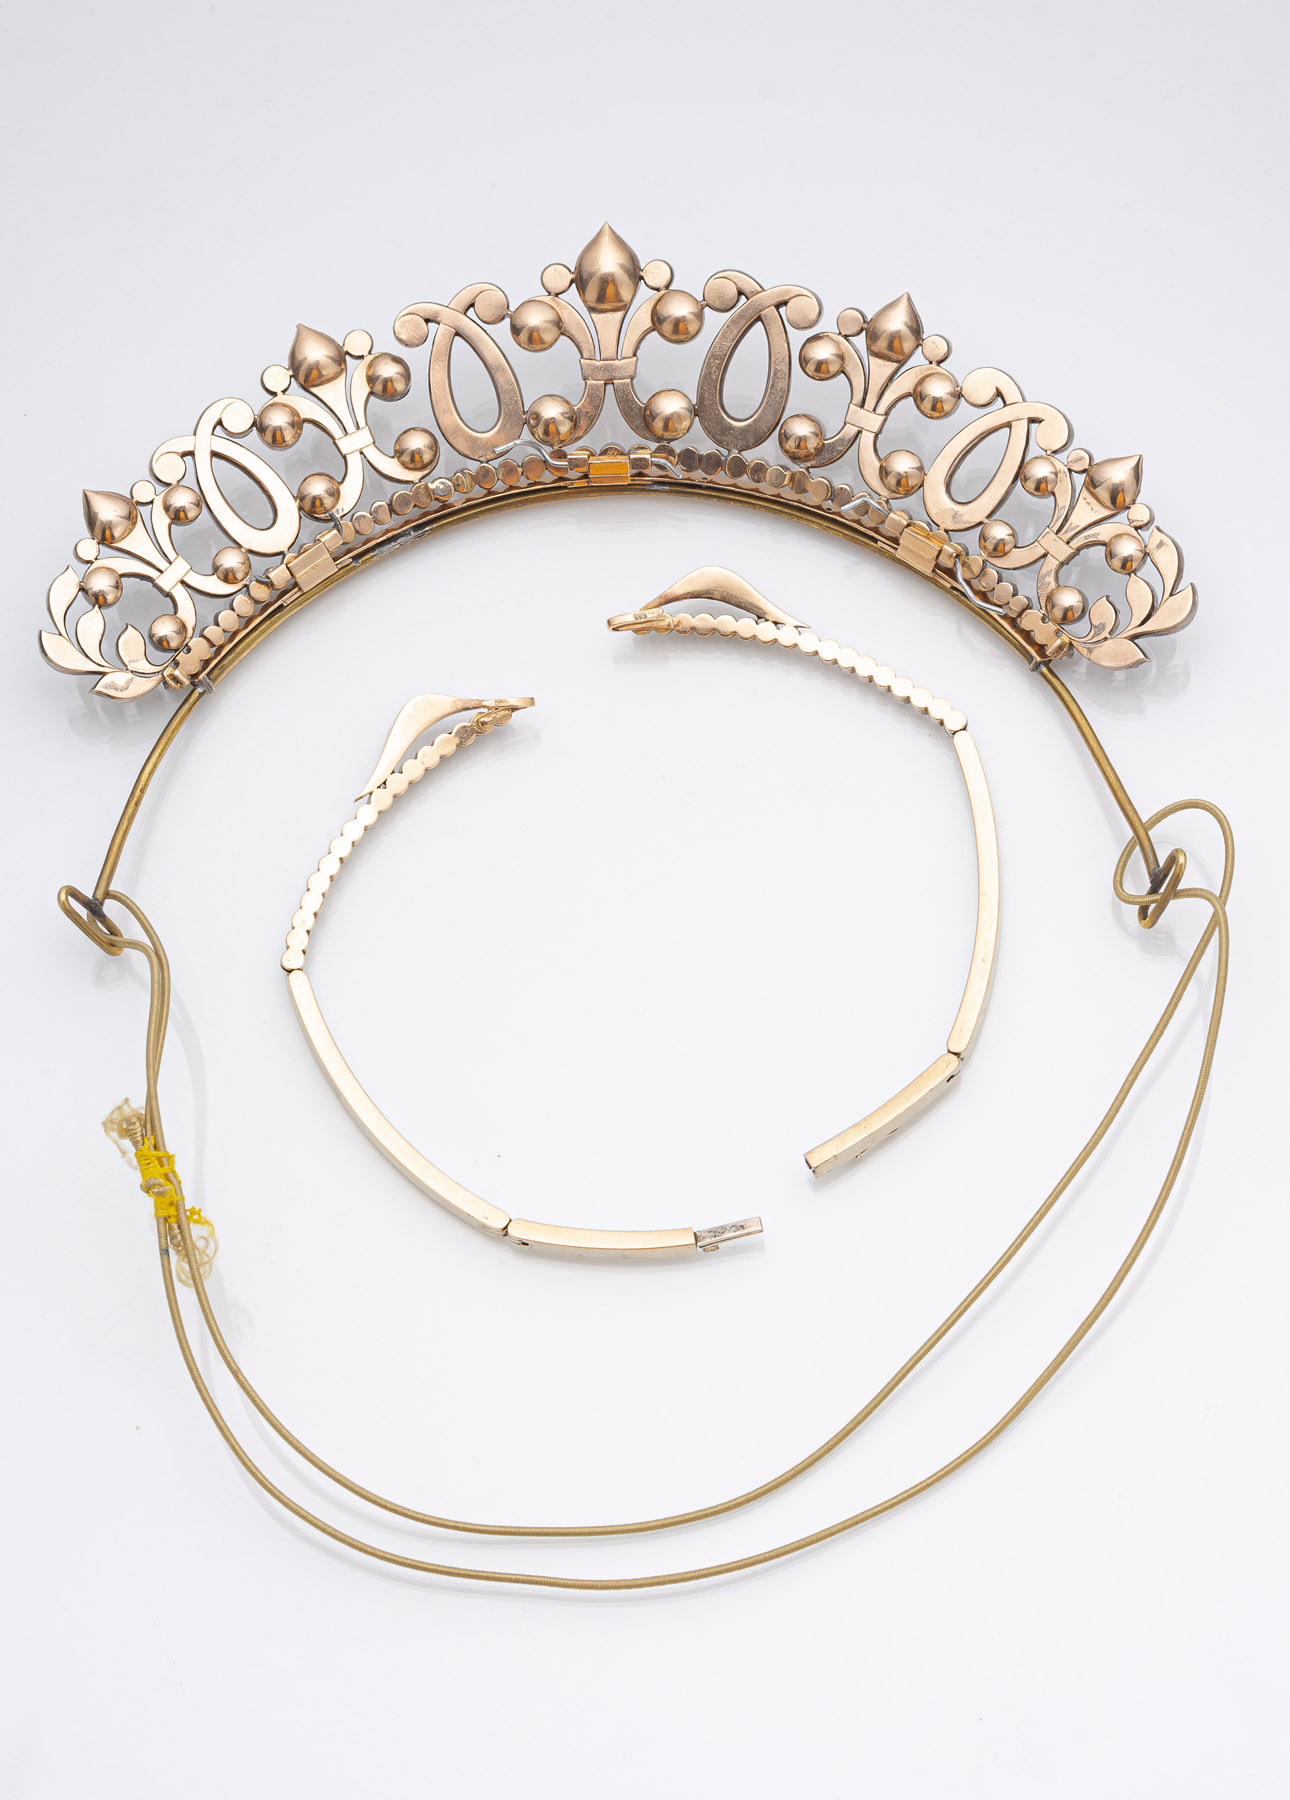 AN EXTREMELY RARE CLASSICAL TIARA WITH DIAMONDS - Image 6 of 8